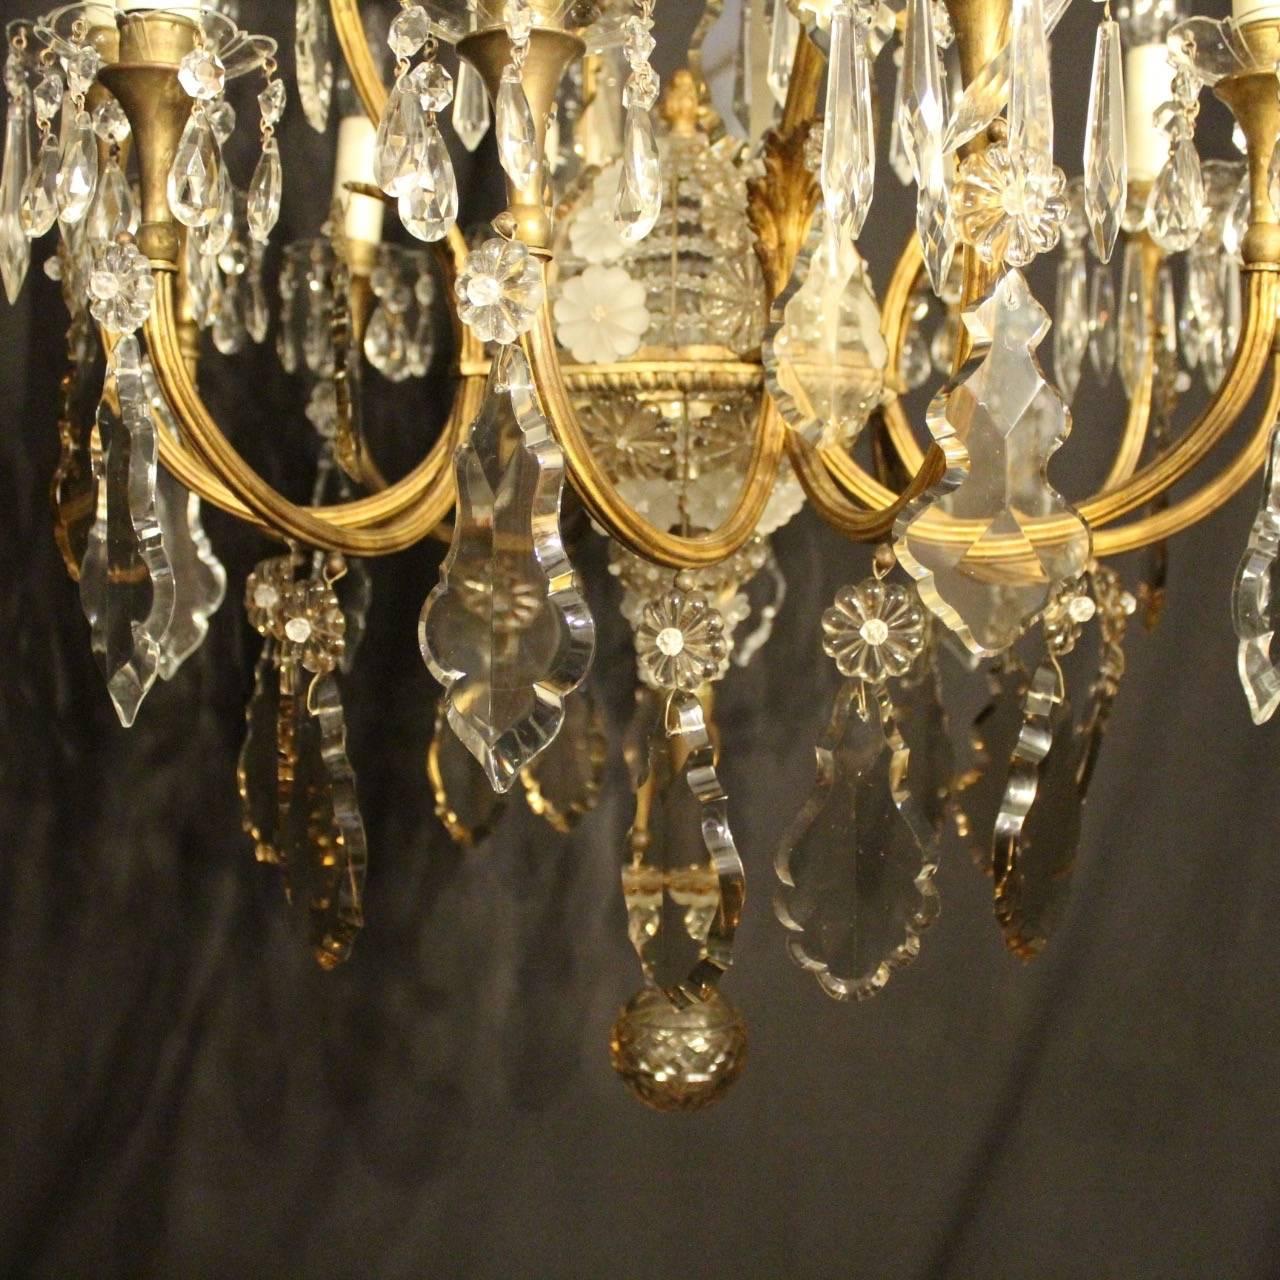 20th Century French Gilded Crystal and Bronze Twelve-Light Antique Chandelier